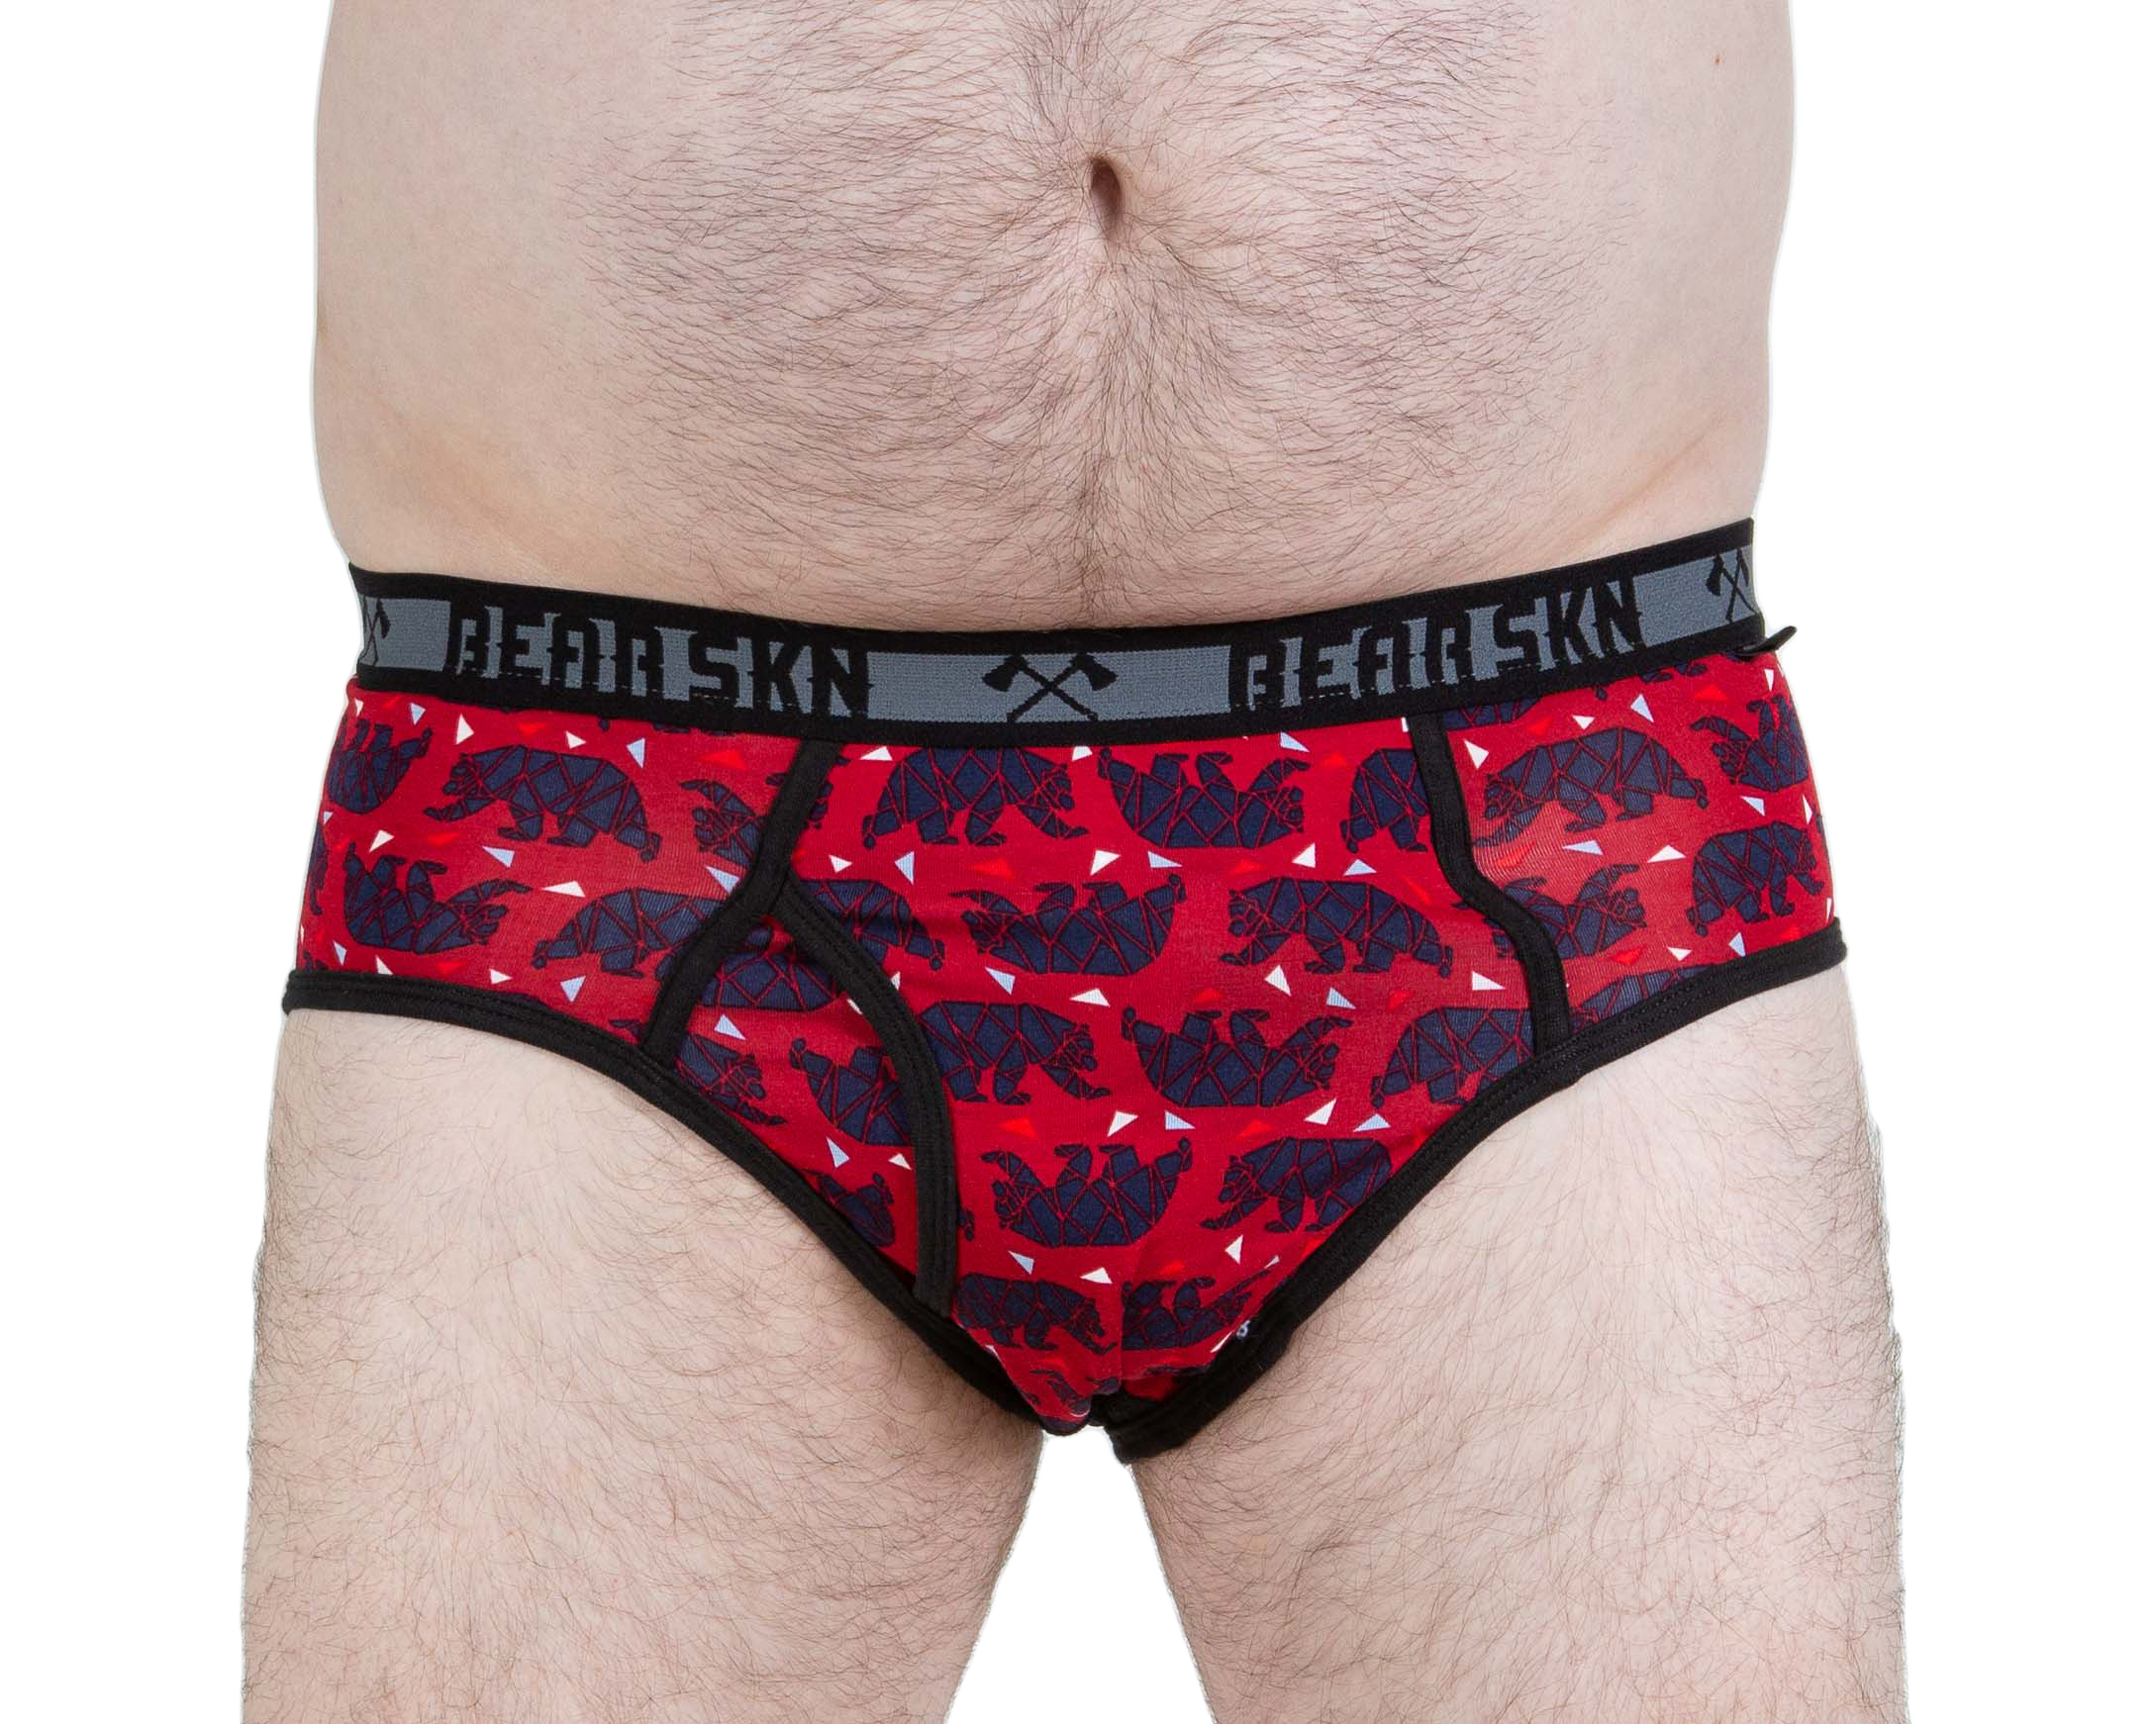 Introducing the Bear Skn Box, the 1st Plus Size Underwear